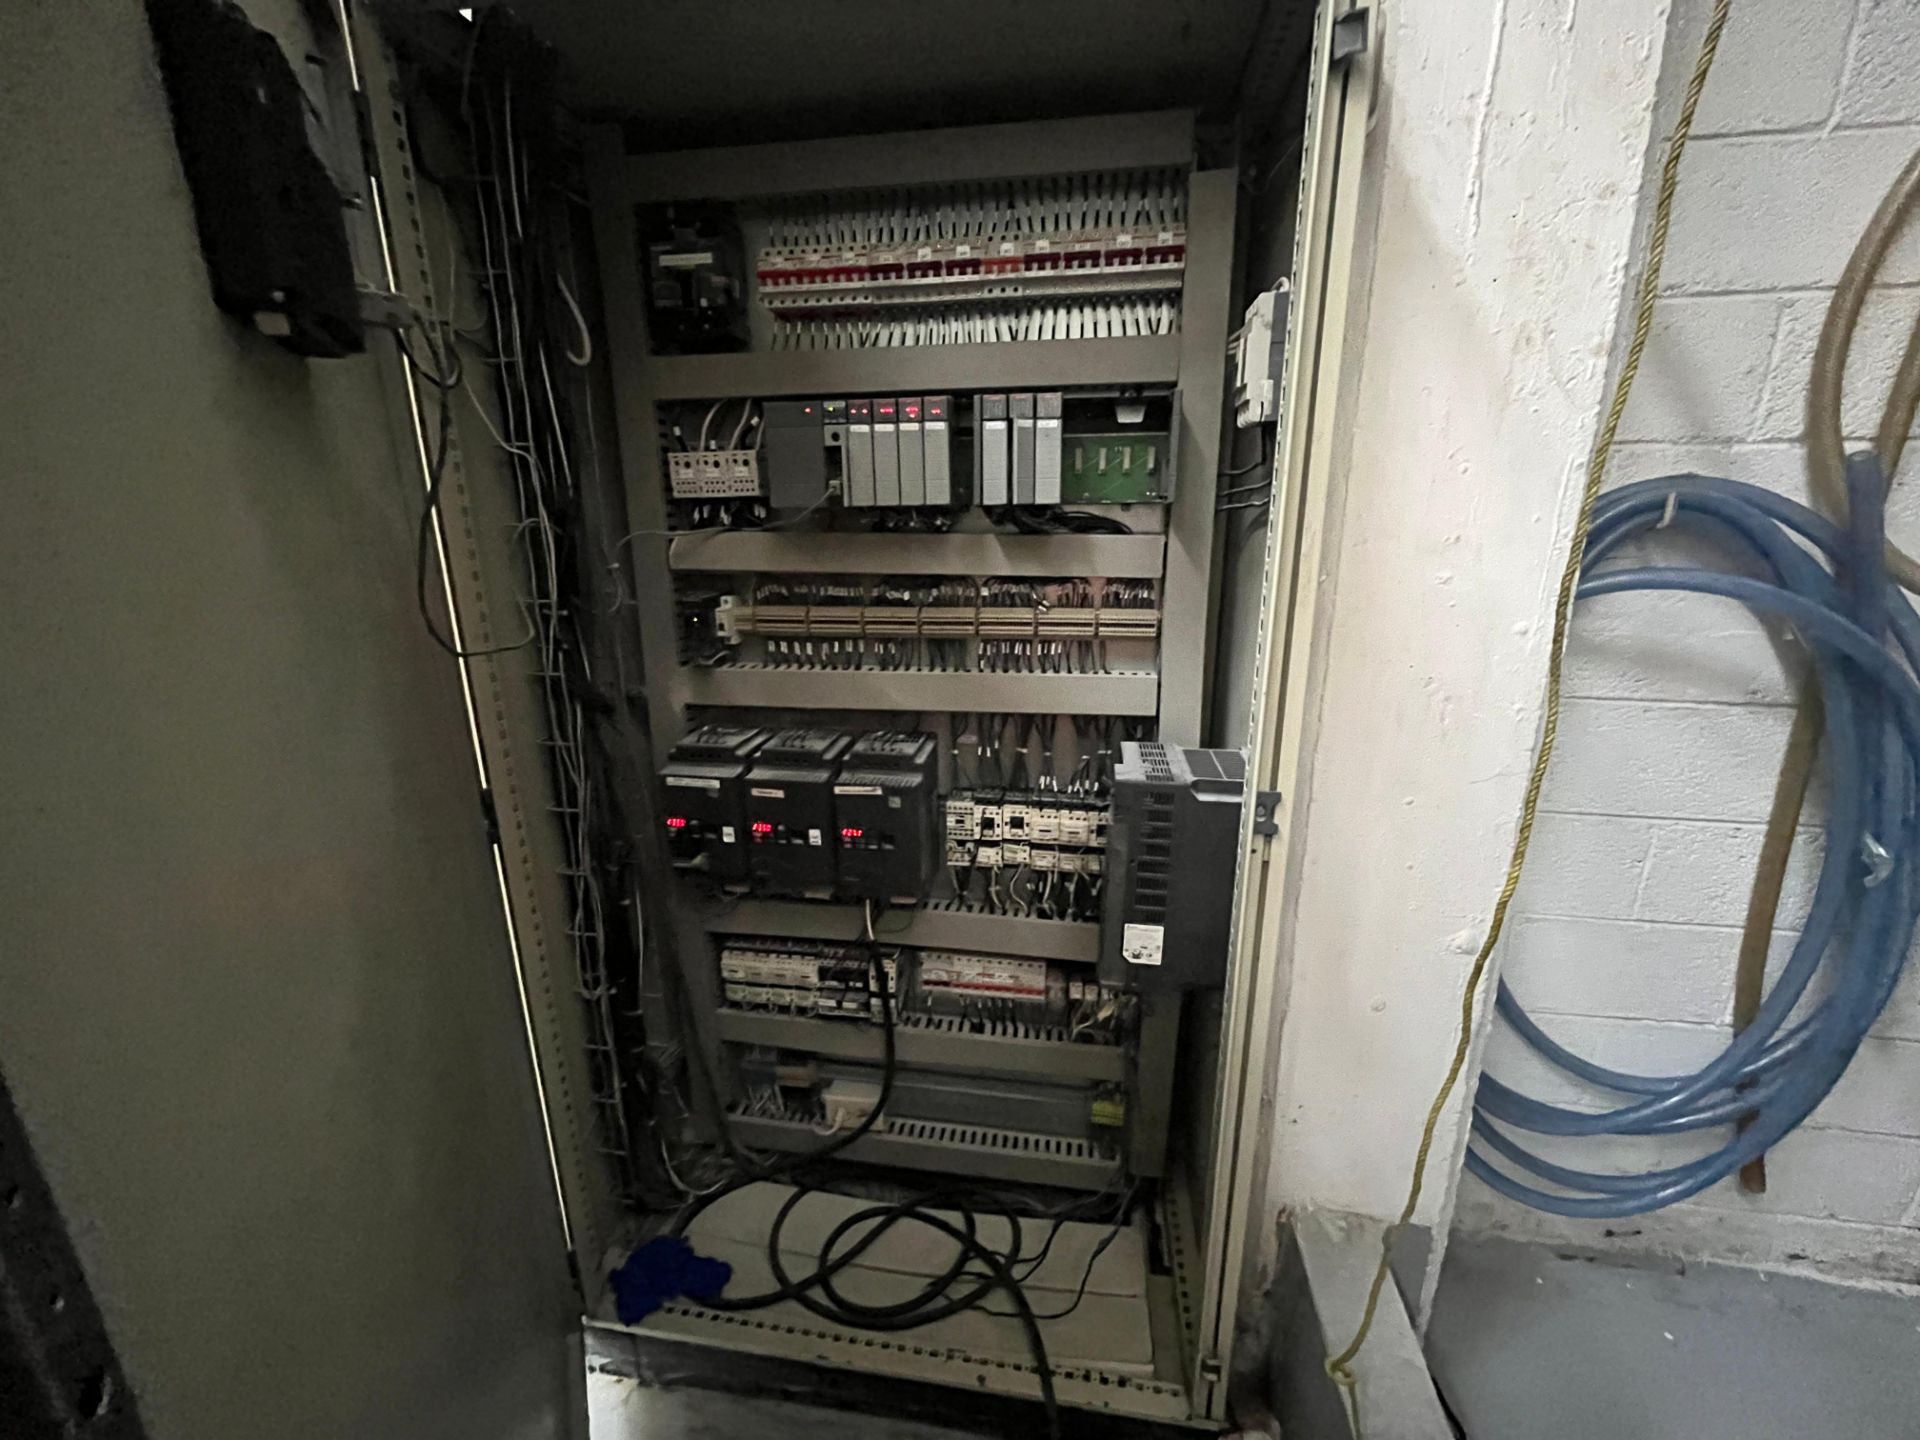 Lot with 1 Electrical control board measuring approximately 1.90 x 1.00 m including - Image 14 of 15